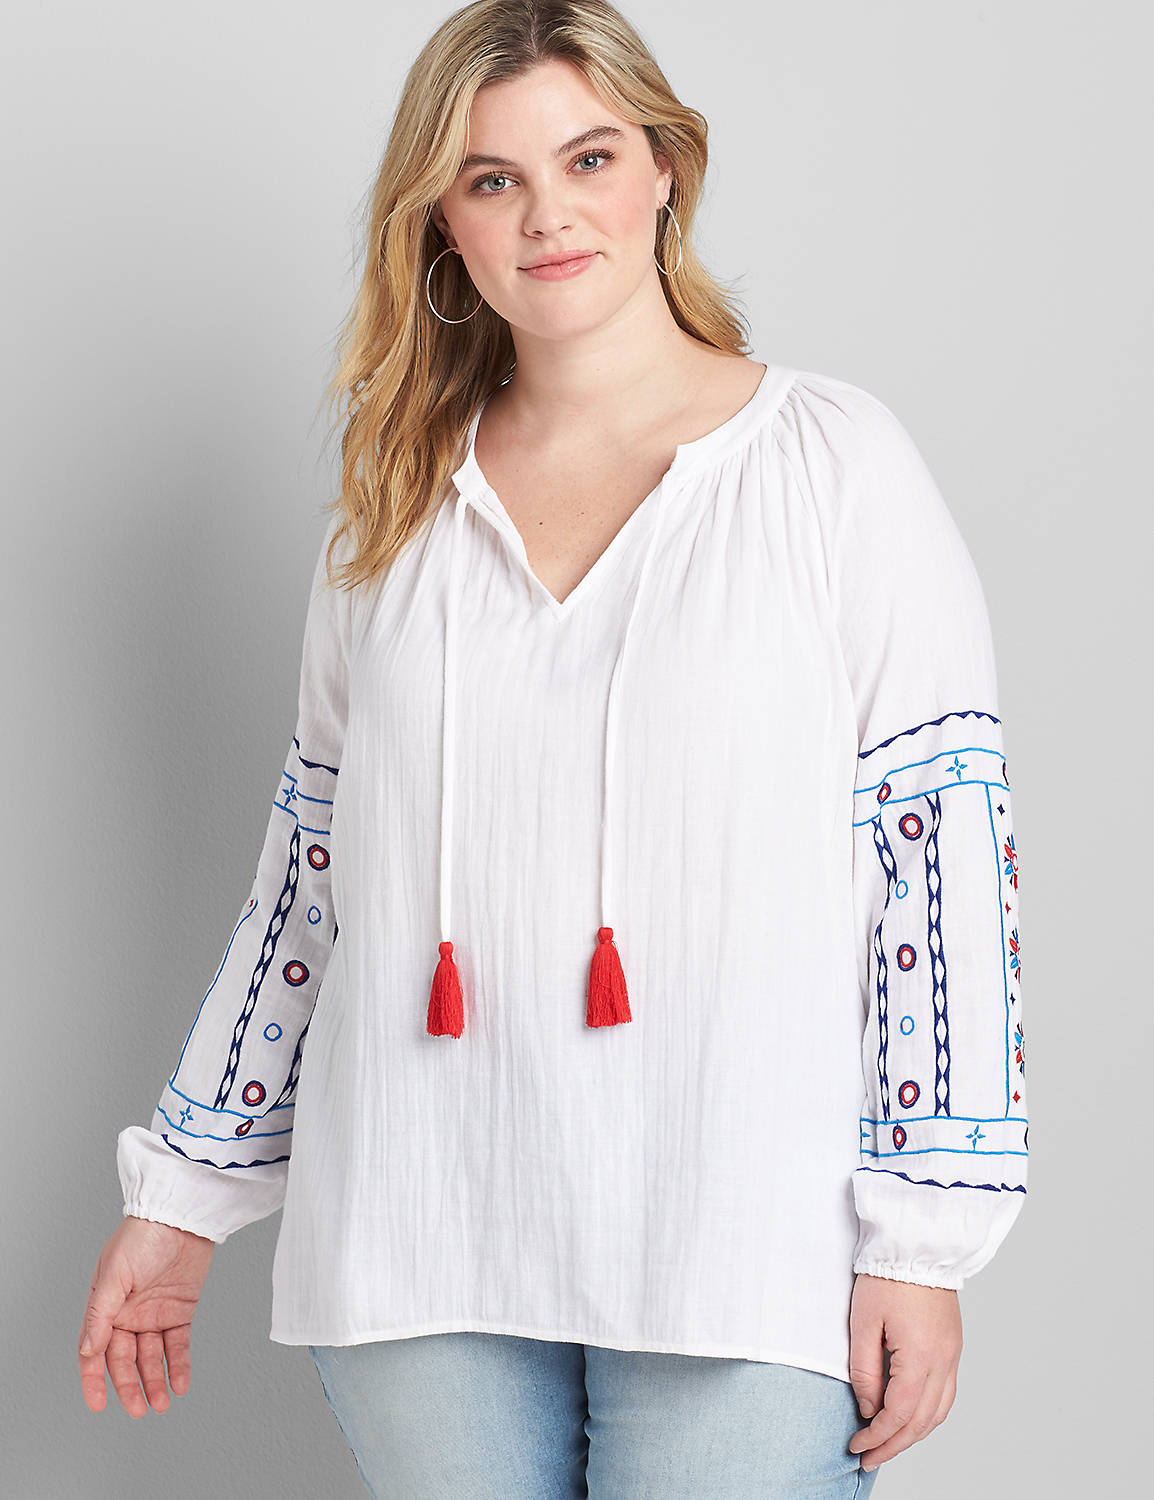 Notch-Neck Embroidered Peasant Top Product Image 1